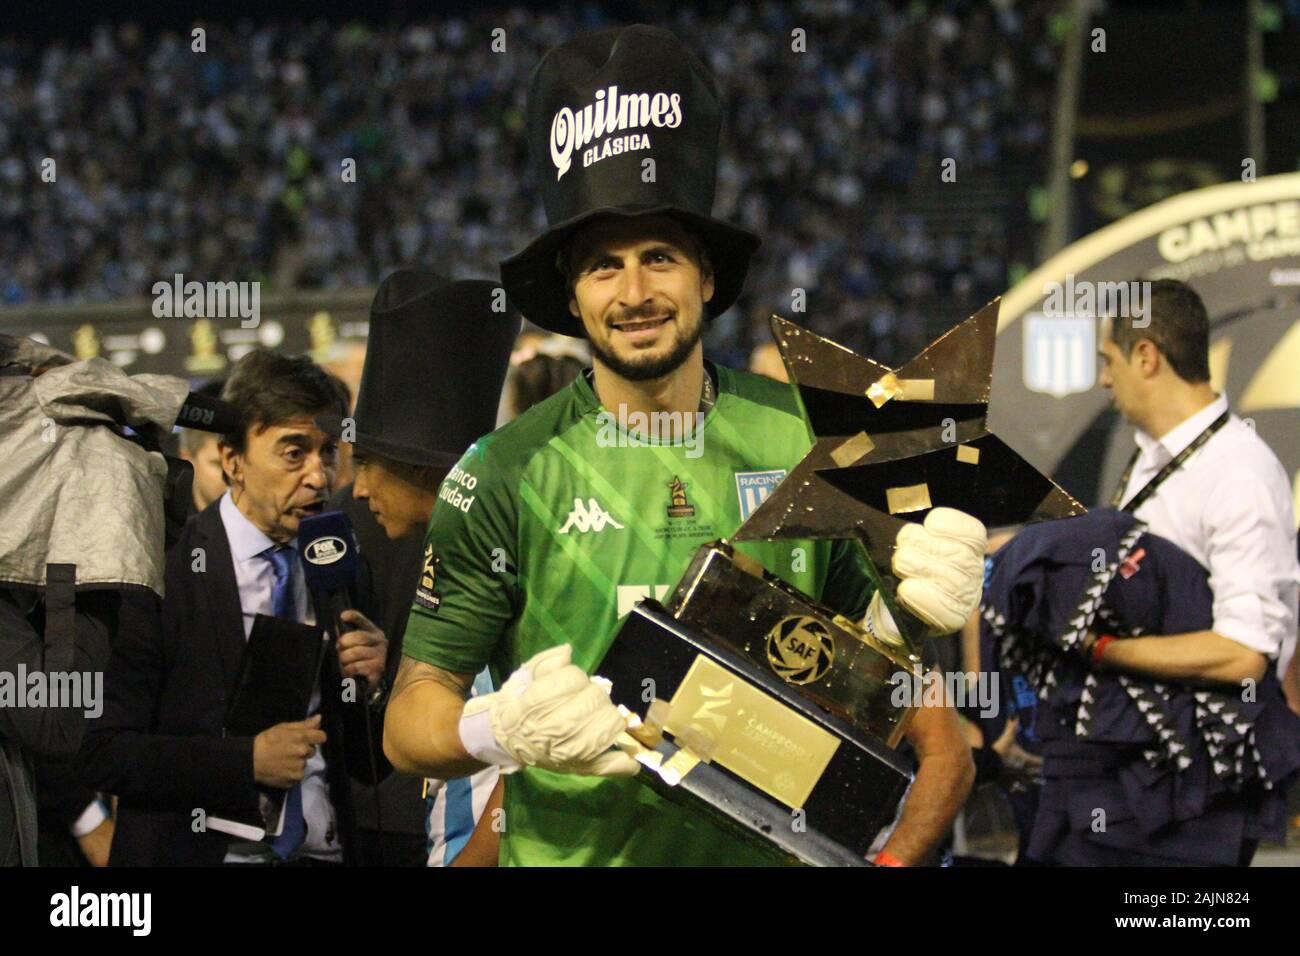 Mar del Plata, Buenos Aires, Argentina. Dec. 14 th 2019. Gabriel Arias lifts the Champions Trophy won by Racing Club Stock Photo